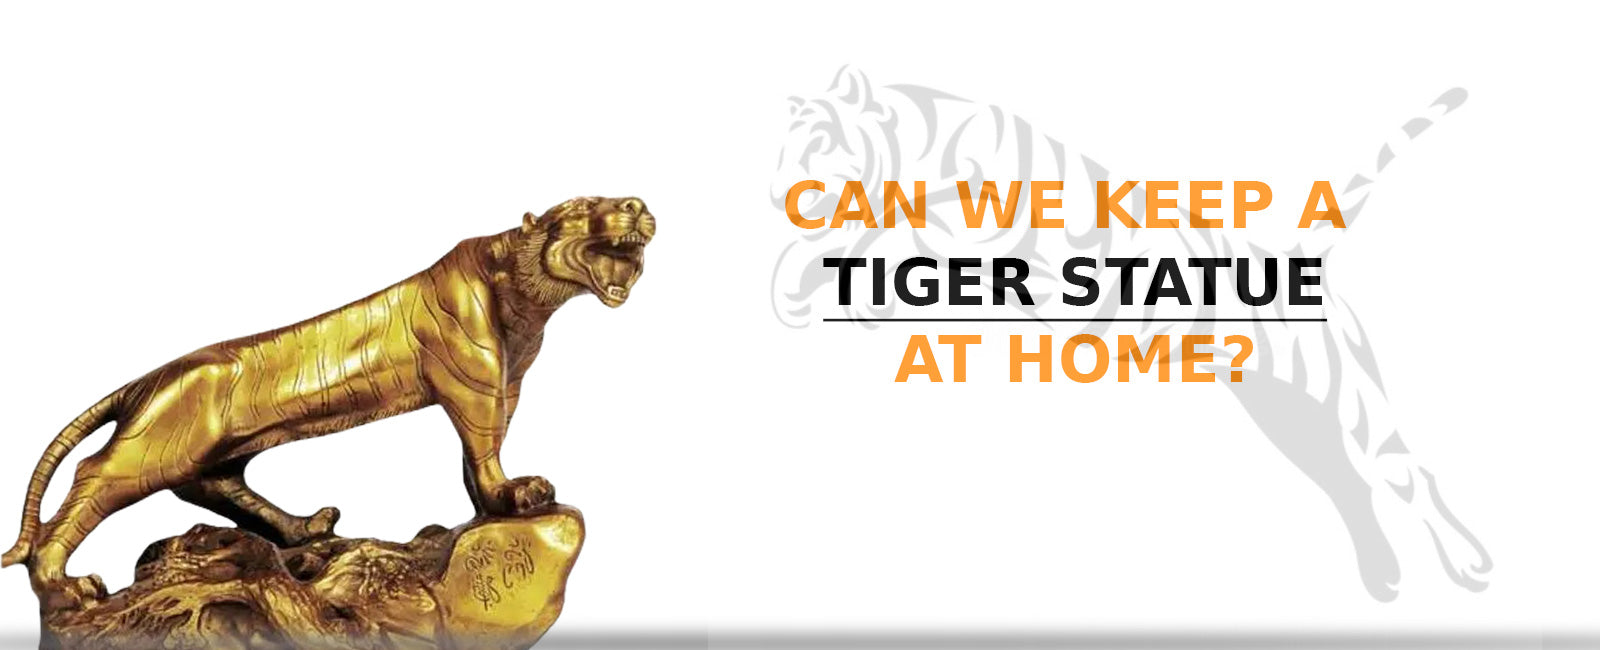 can we keep tiger statue at home